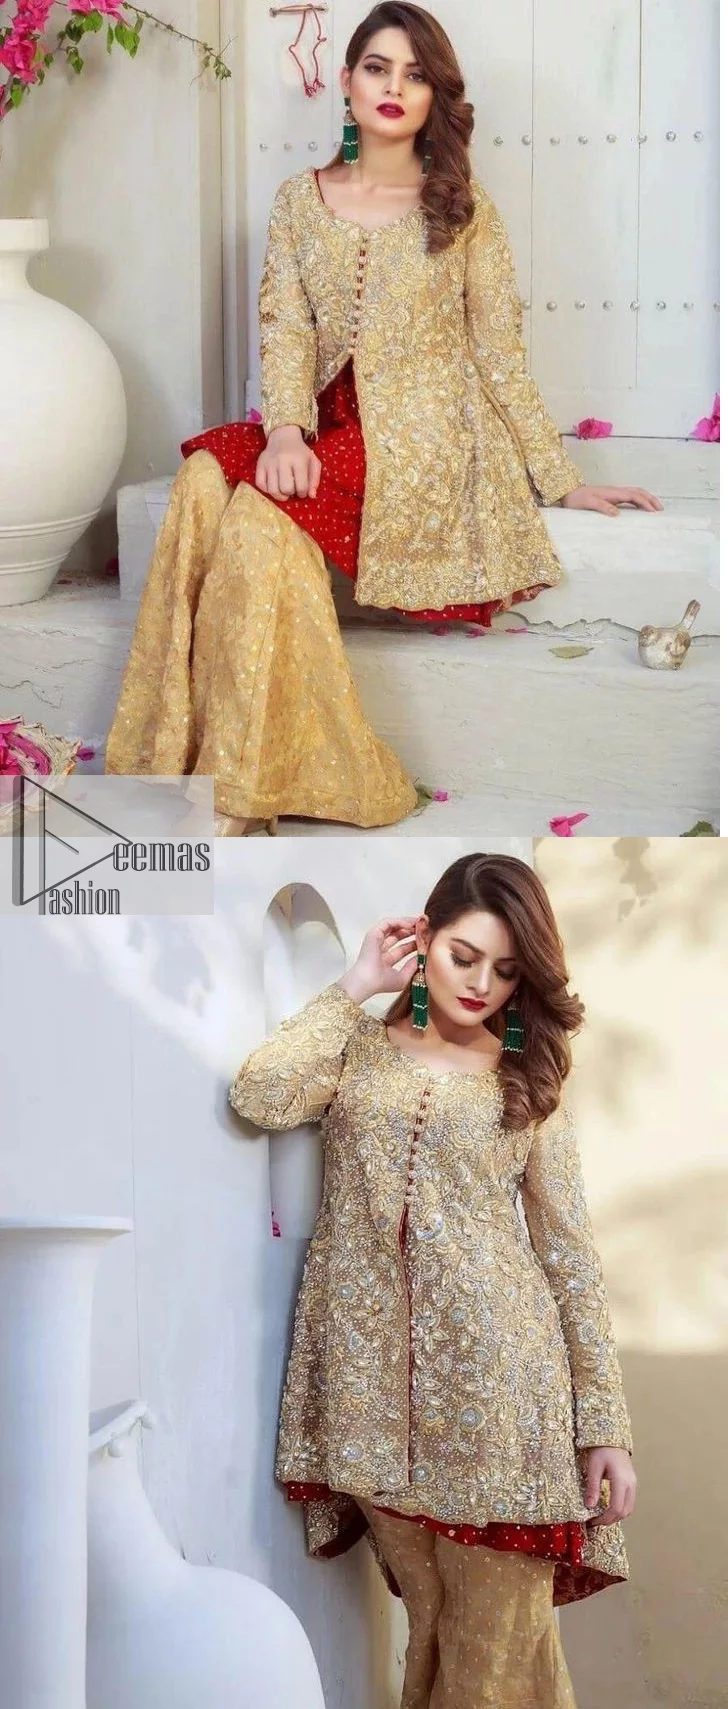 Clean, modern and timeless. The beautiful front-open short shirt in a light golden colour is adorned with embellishments of silver embroidery. It is enhanced with tilla, dabka, kora, Kundan and the real magic of Zardozi. The round neckline makes this outfit unique and lovely. Further, the floral patterns on full sleeves also add super beauty to the outfit. The inner of the short shirt has a red frock combination that gives an aesthetic look. Complete this article with trousers in the same colour as a short shirt just to balance the royal look.   